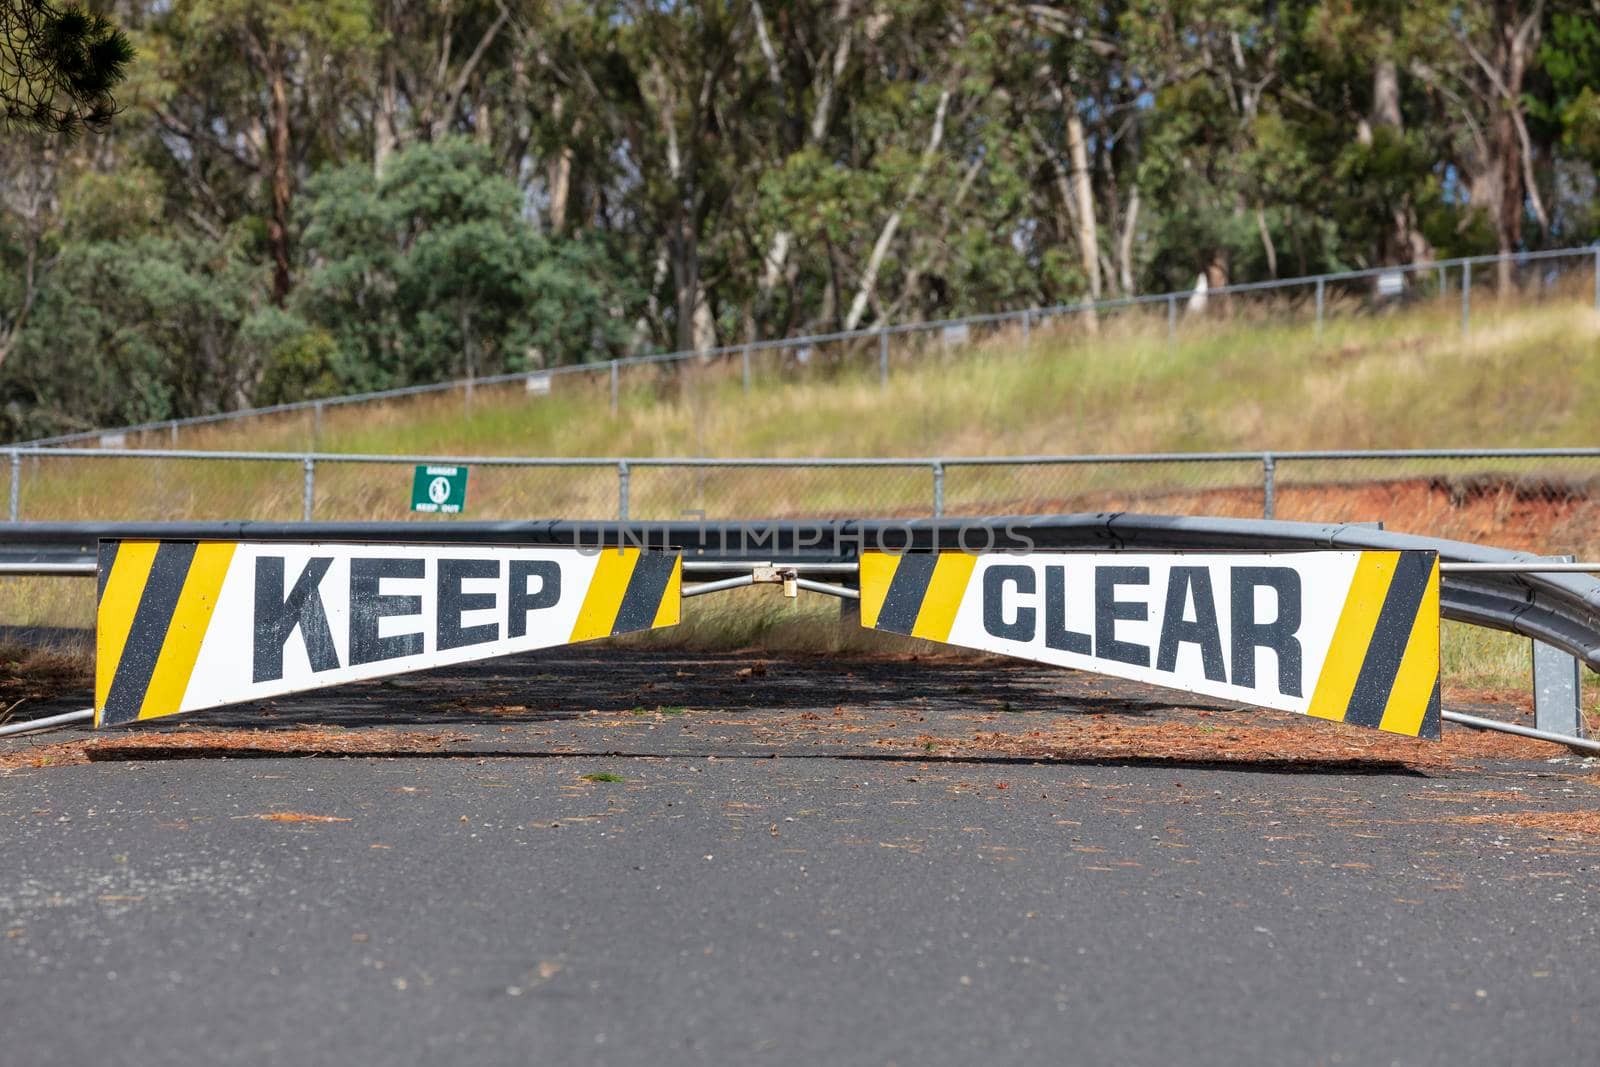 A safety keep clear boom gate on a road near bushland and a steel fence